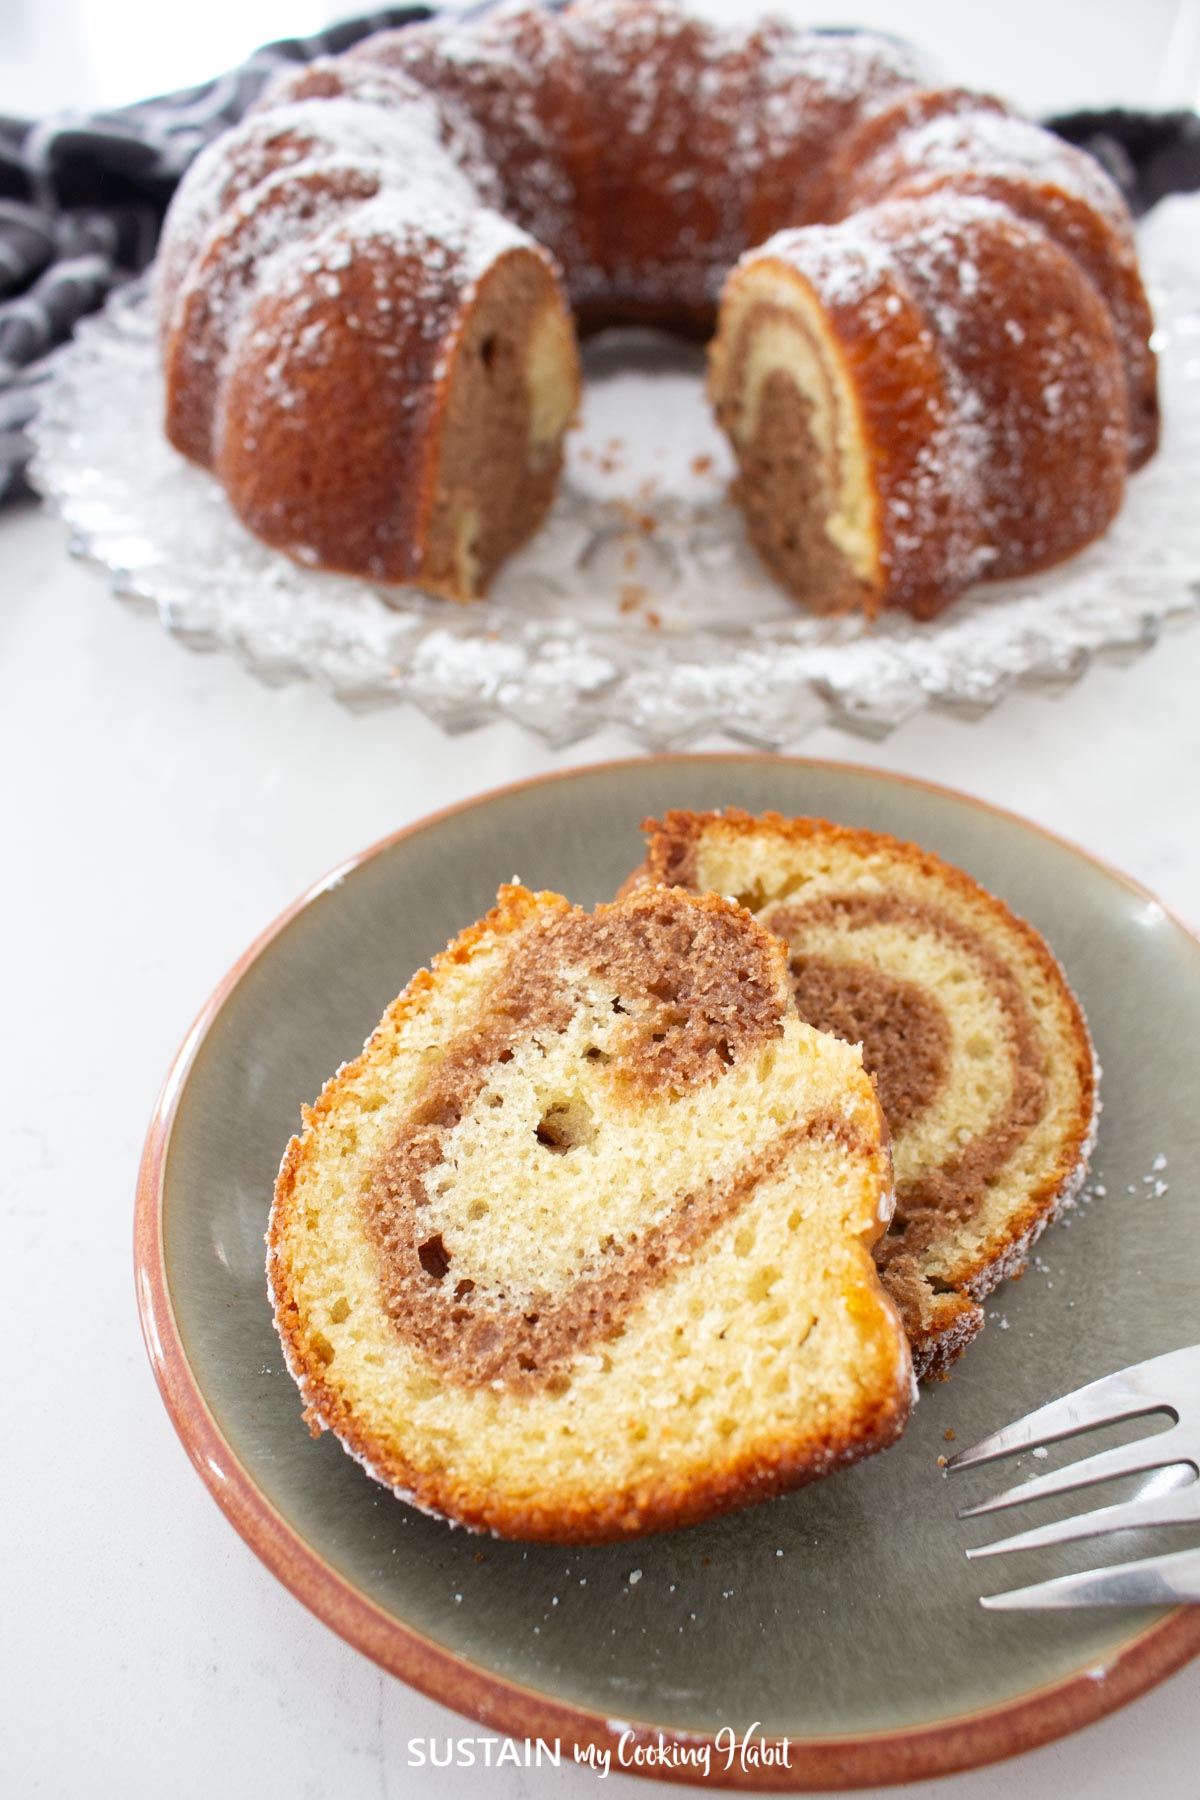 Marbled bundt cake with a slice taken out and placed on a plate.